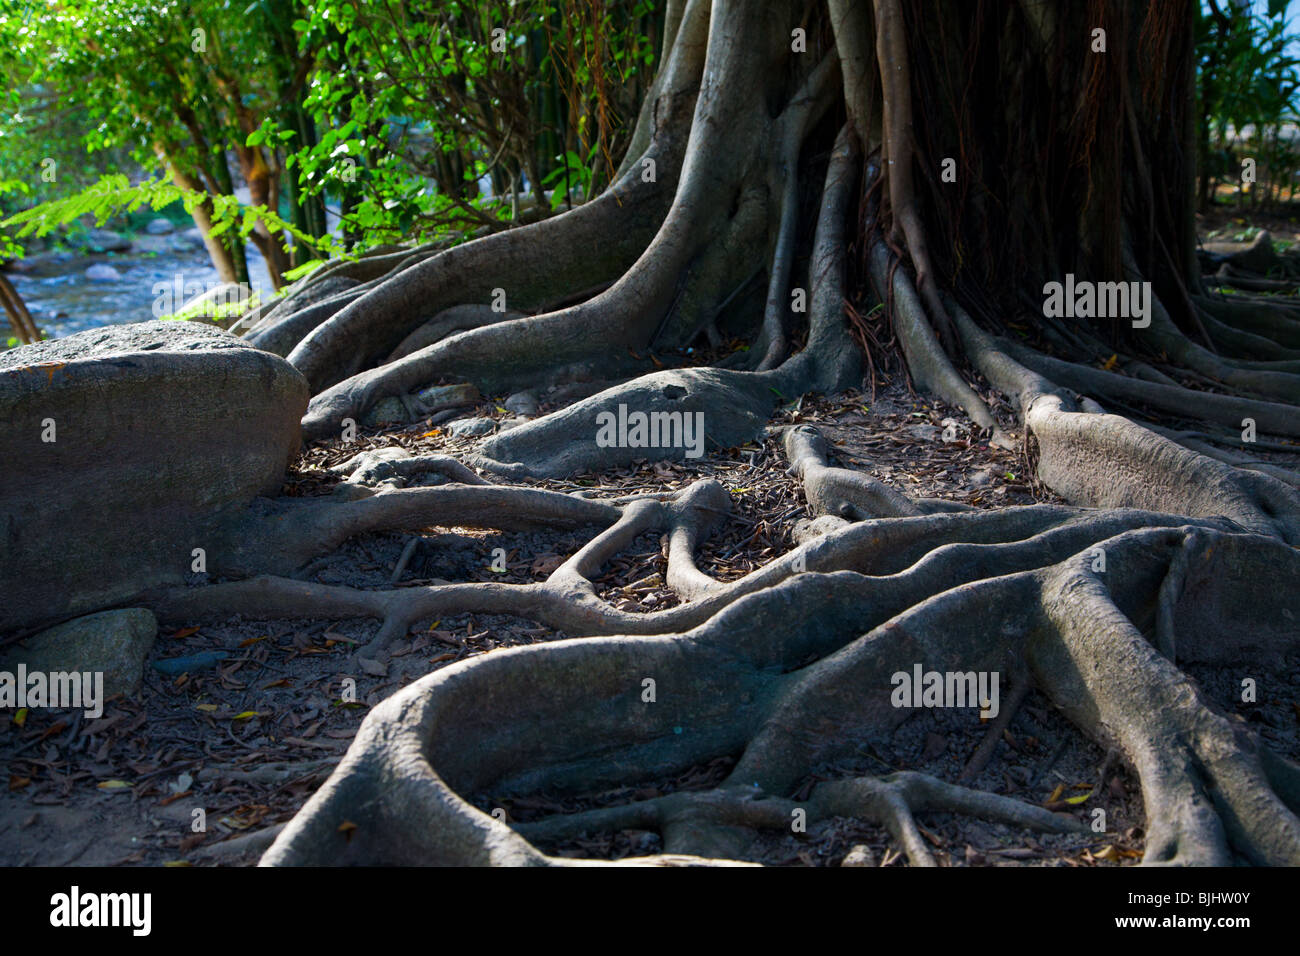 Roots Stock Photo